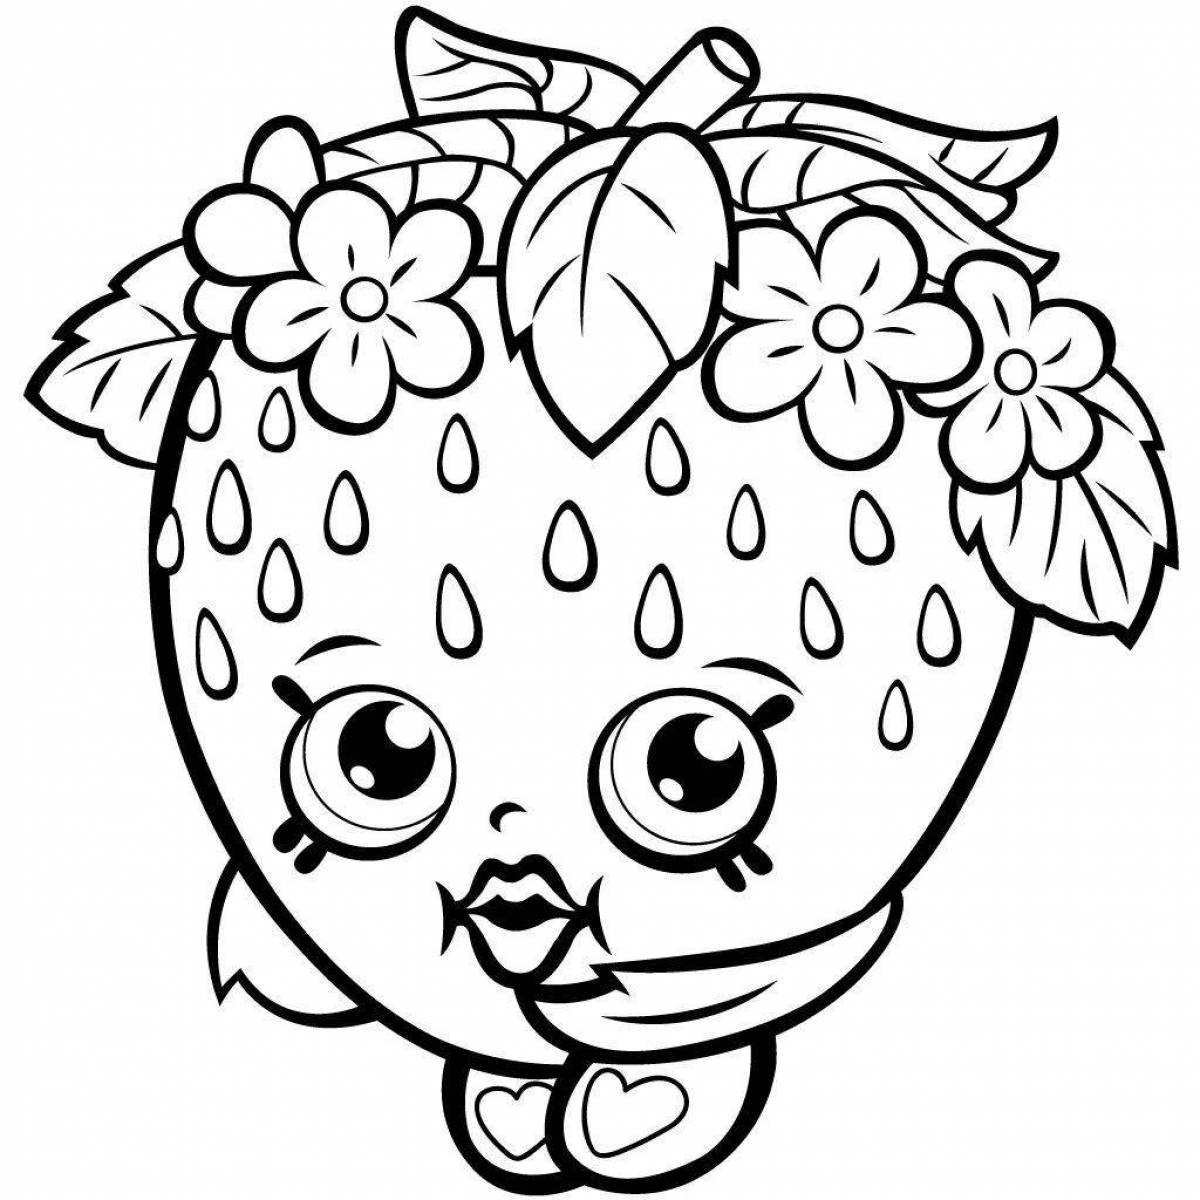 Creative strawberry coloring book for 5-6 year olds